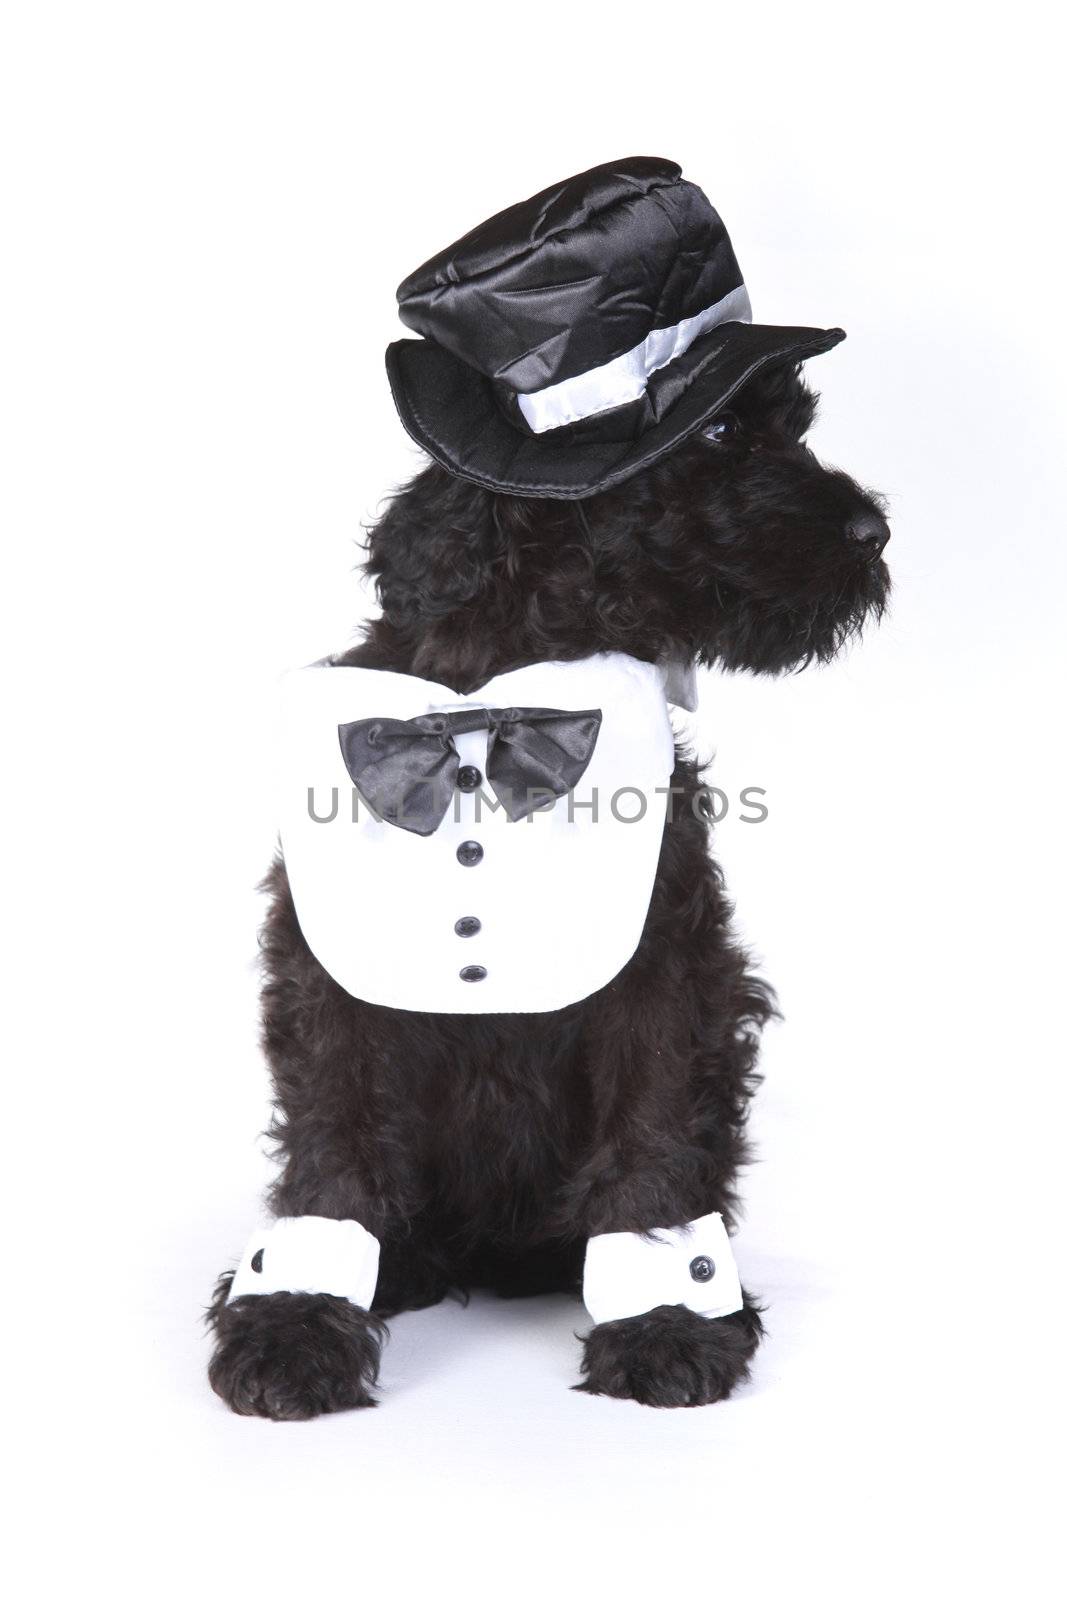 Black Russian Terrier Puppy Dog Butler on White Background